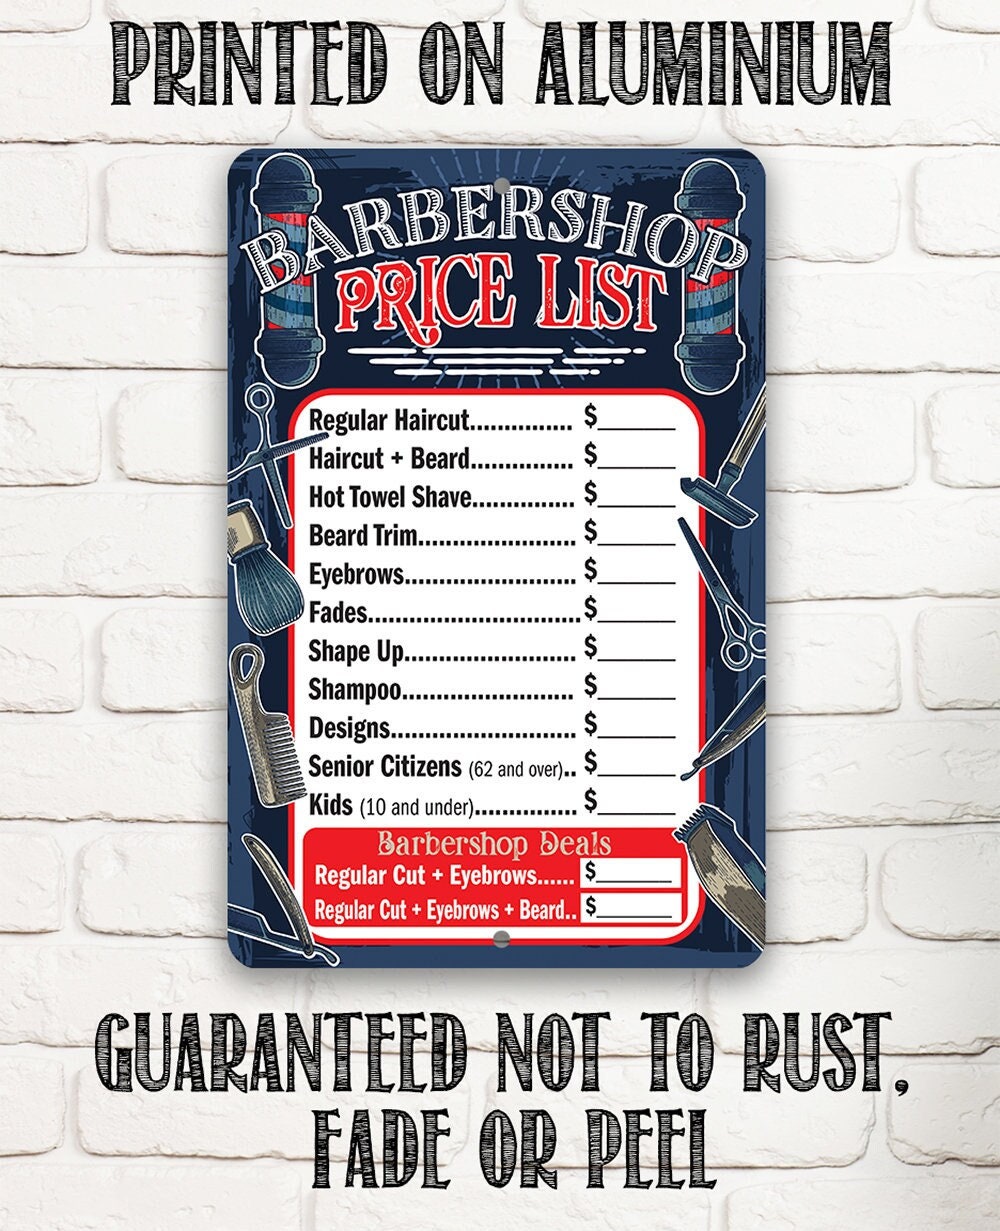 Barbershop Price List - 8" x 12" or 12" x 18" Aluminum Tin Awesome Metal Poster Lone Star Art 